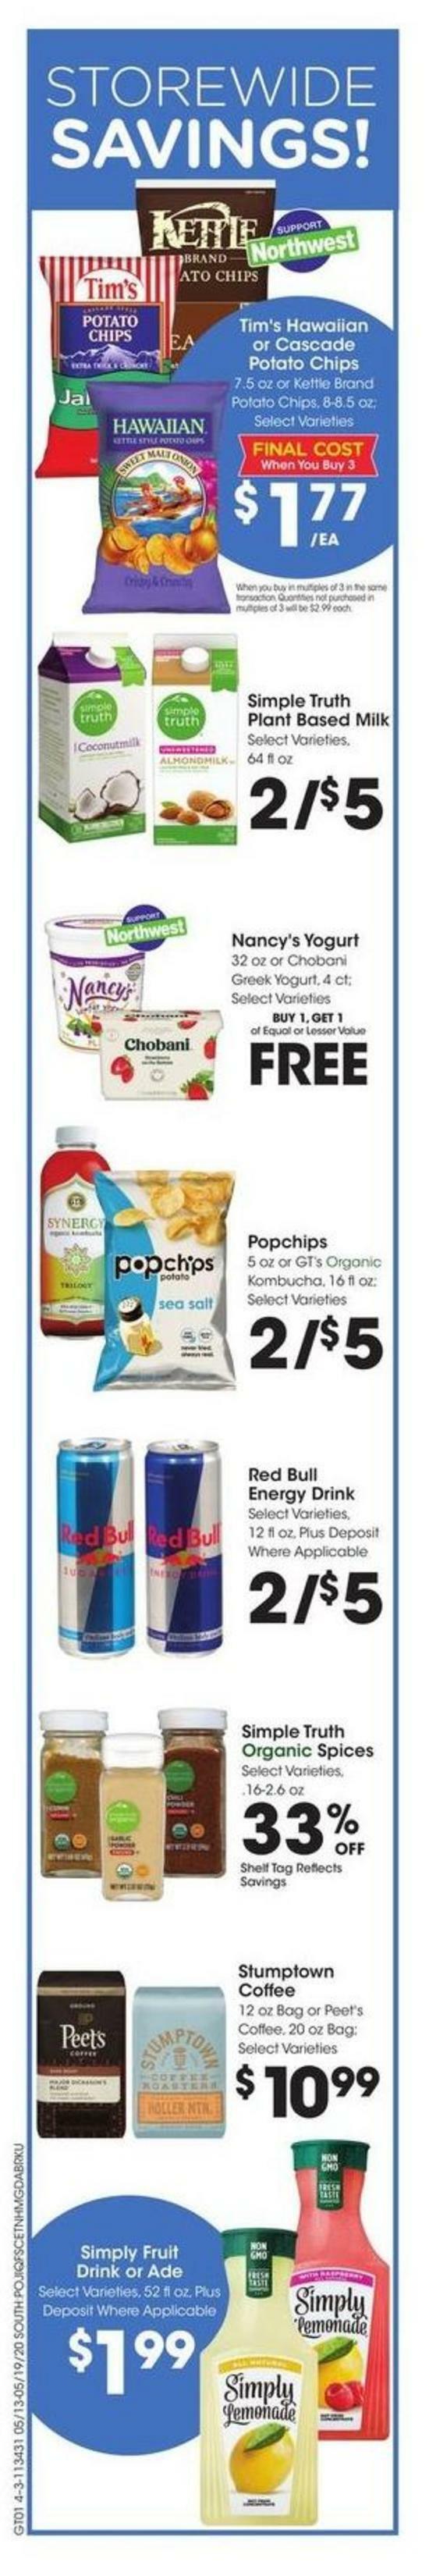 Fred Meyer Founder's Day Sale Weekly Ad & Specials from May 13 Page 9